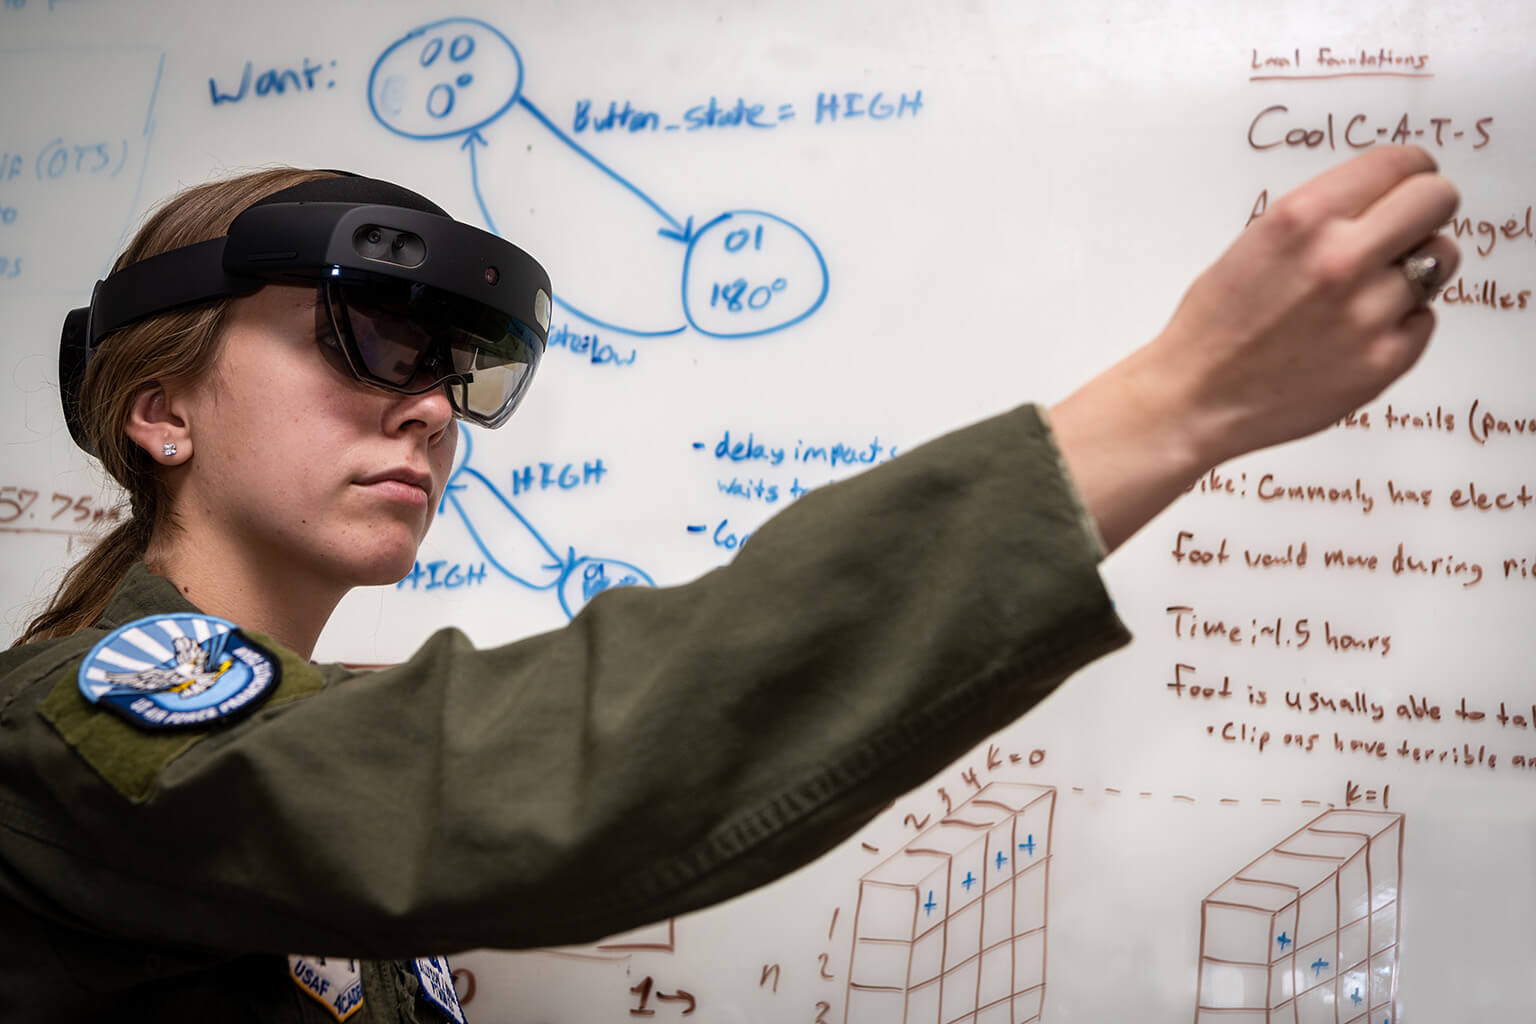 Computer Engineering cadet with augmented reality glasses